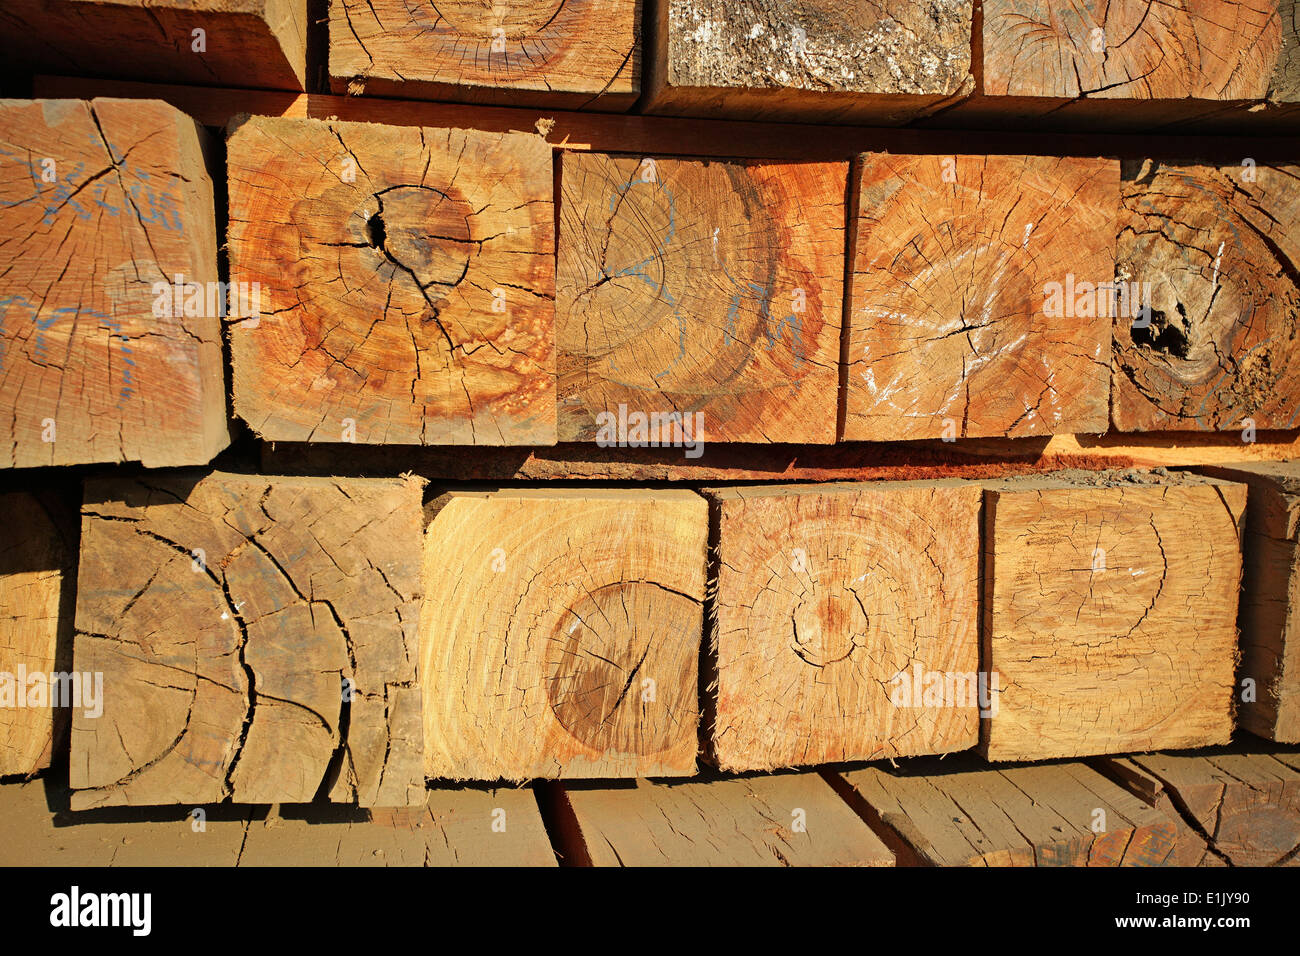 Square cut logs of wood in a timber yard Stock Photo